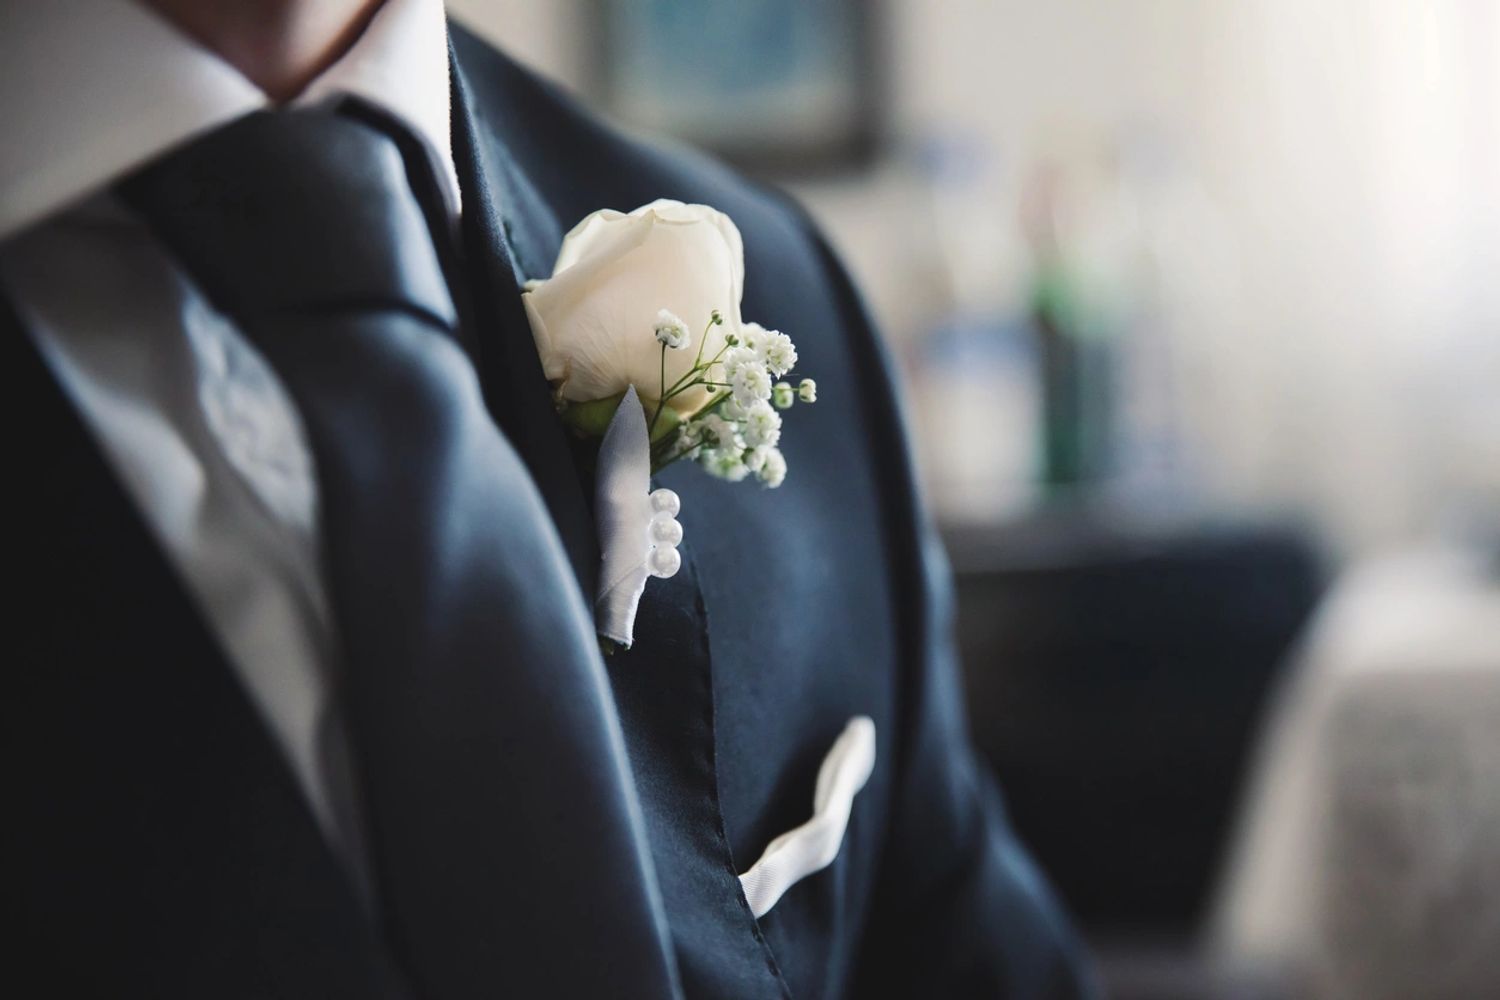 Groom wearing navy hire suit with matching tie, buttonhole & pocket square